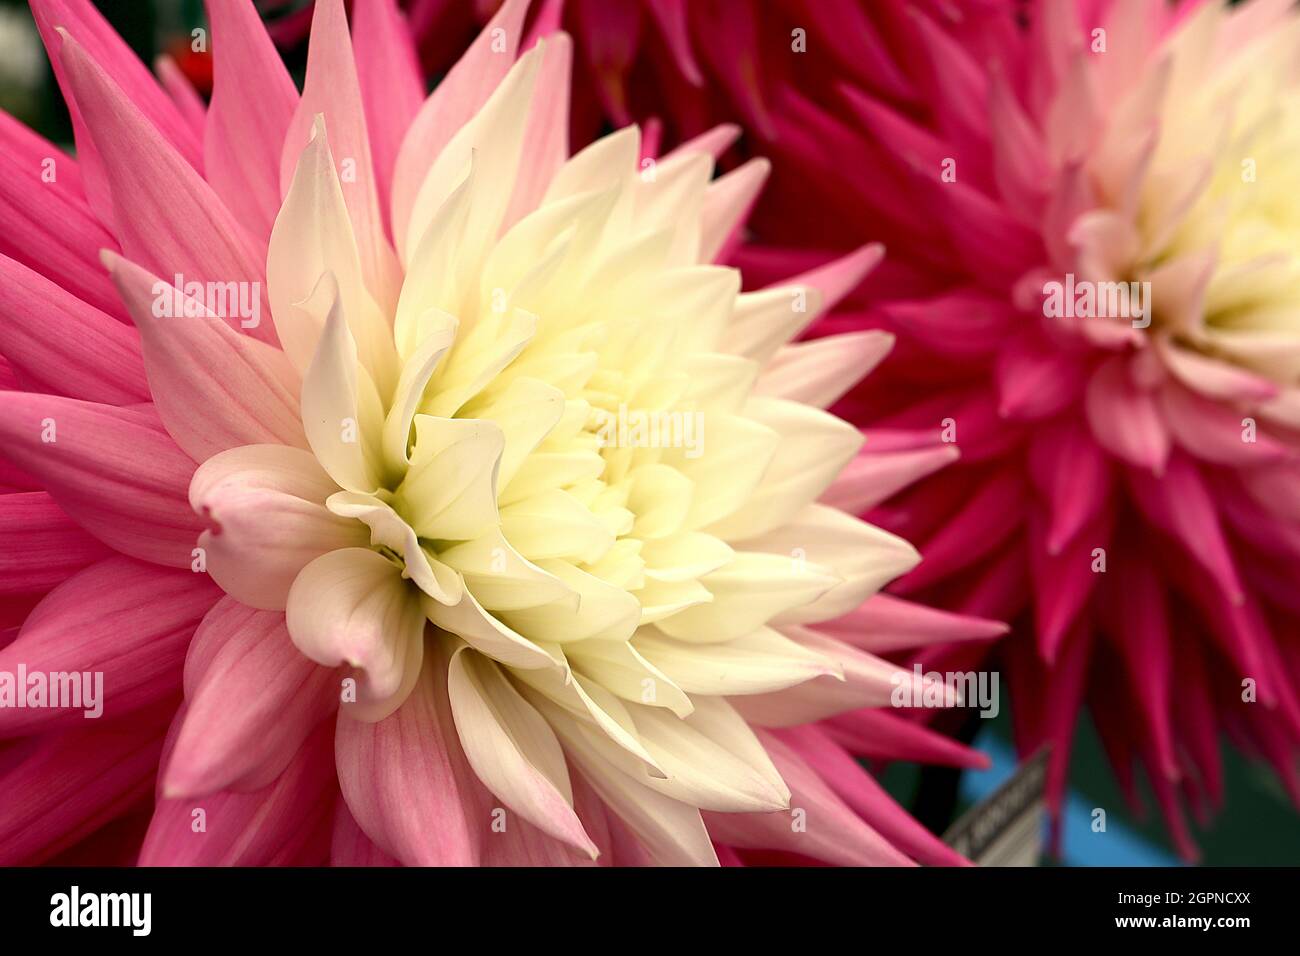 Dahlia ‘Hillcrest Candy’ Semi-cactus dahlia Group 9 ombre effect flowers from pale yellow to pale orange to coral pink petals, rolled spiky petals, Stock Photo